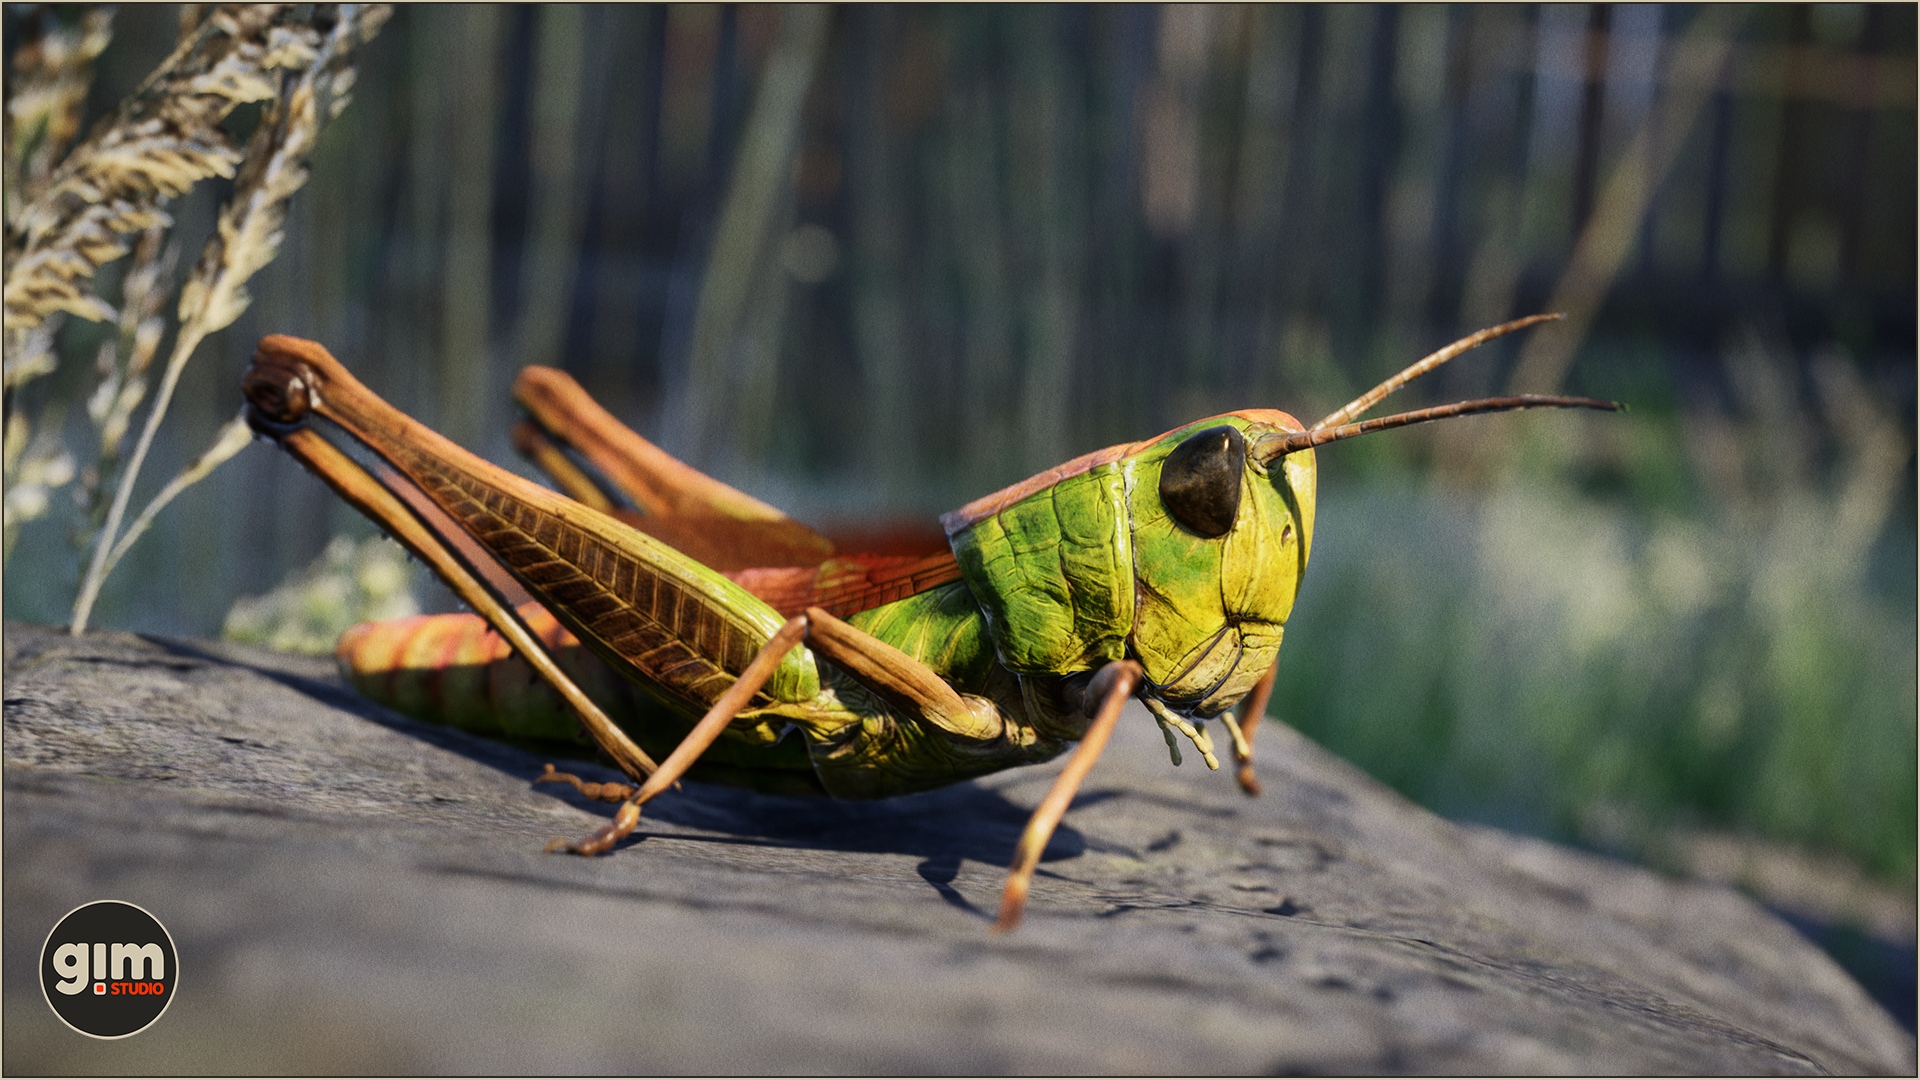 Sideview of Grasshopper